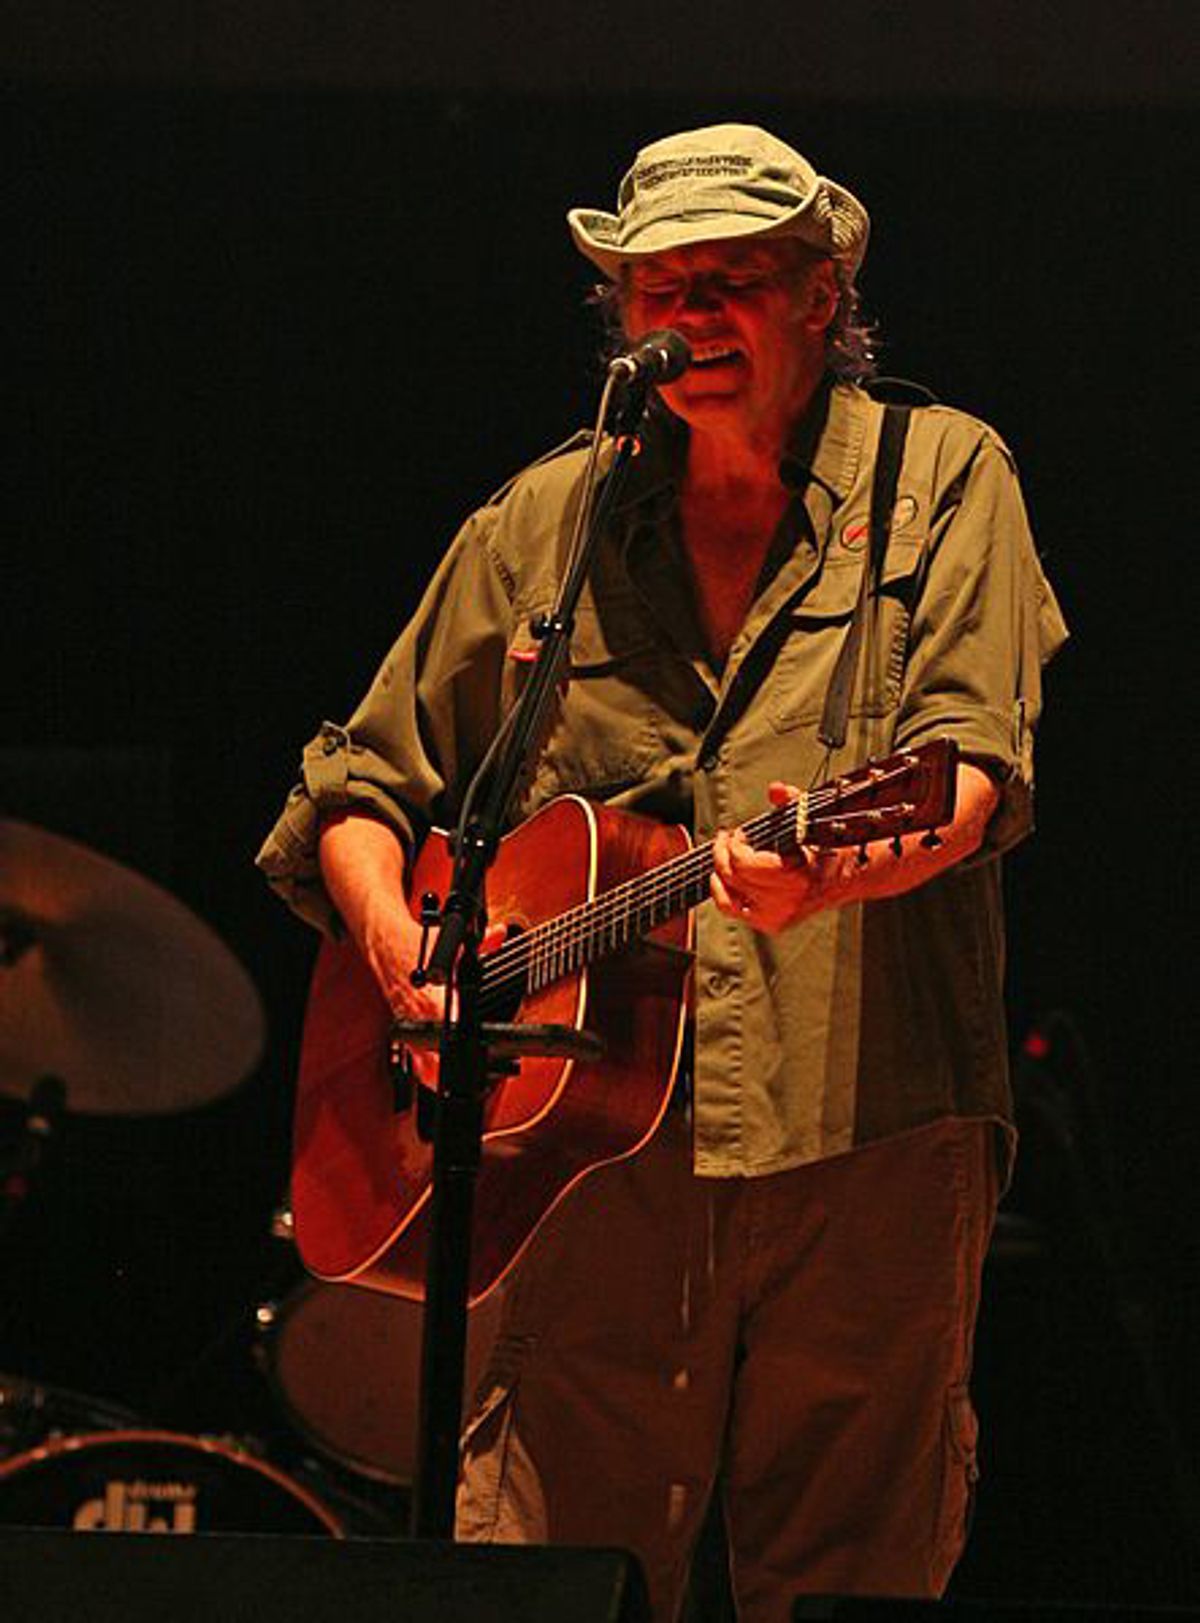 Neil Young and Crazy Horse Cancel European Tour After Accident